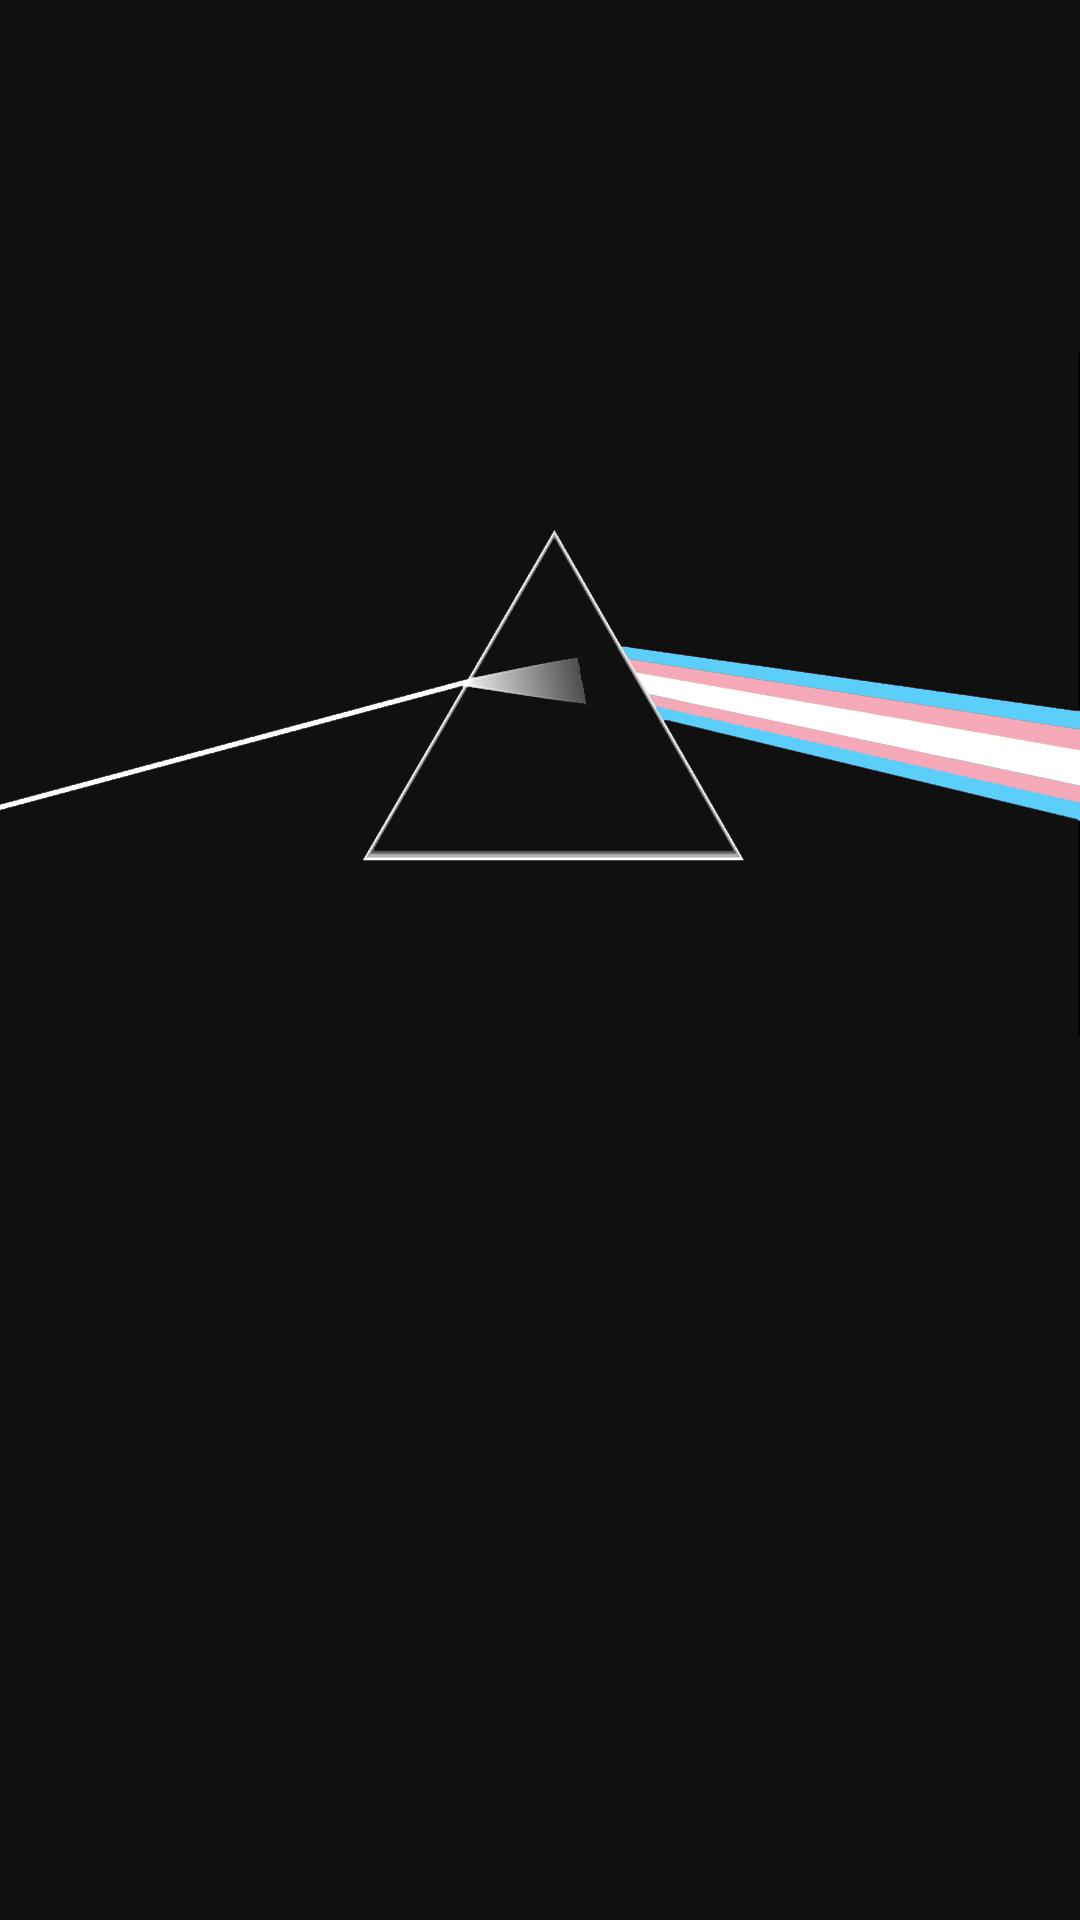 I made a Trans Side of the Moon phone wallpaper for you guys